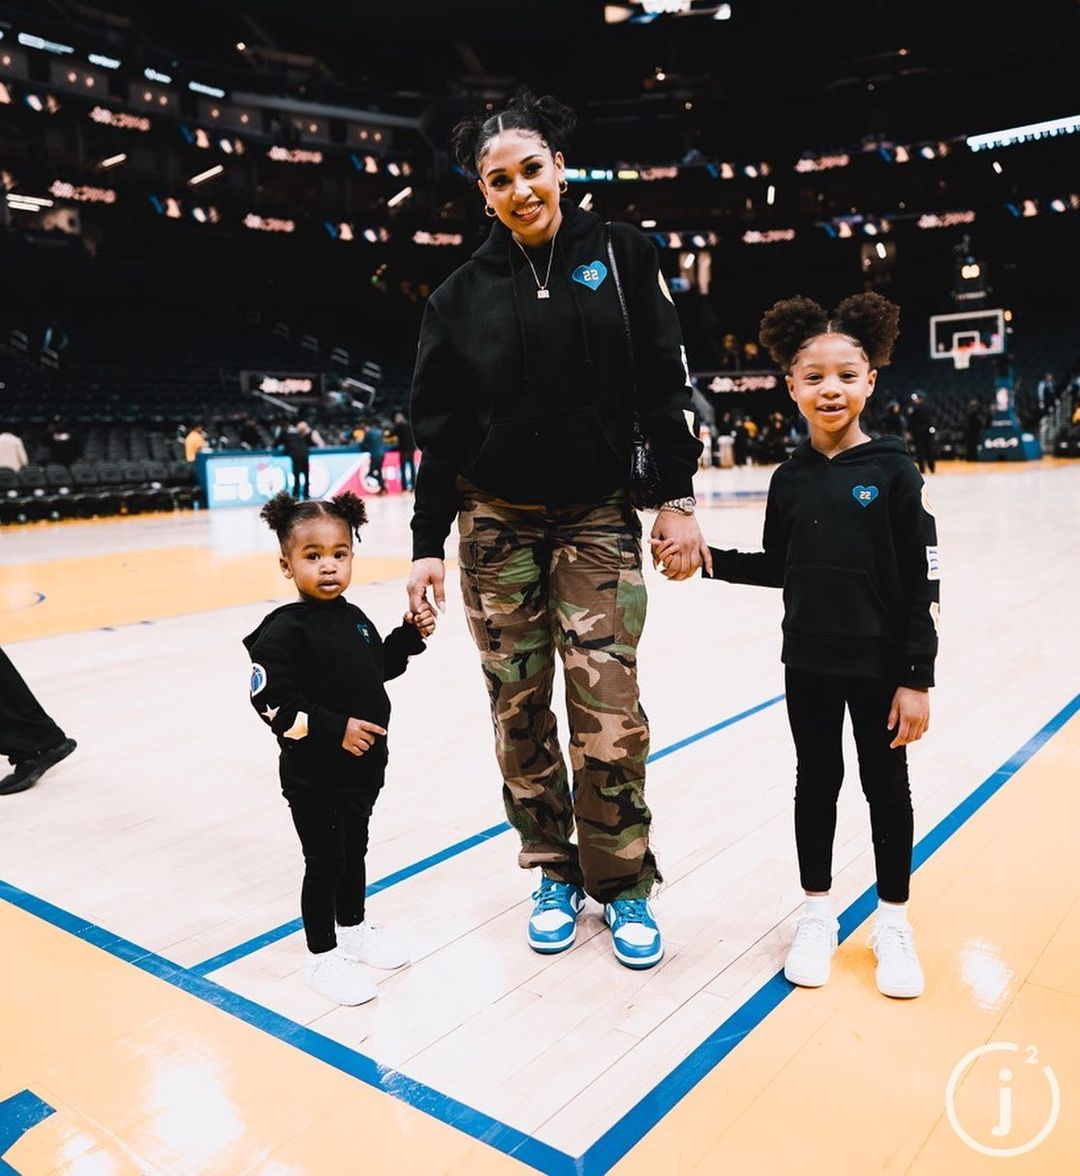 Mychal Johnson with her two daughters Amyah and Alayah from her Instagram: "Gangg wit me🤞🏽💙💛" 